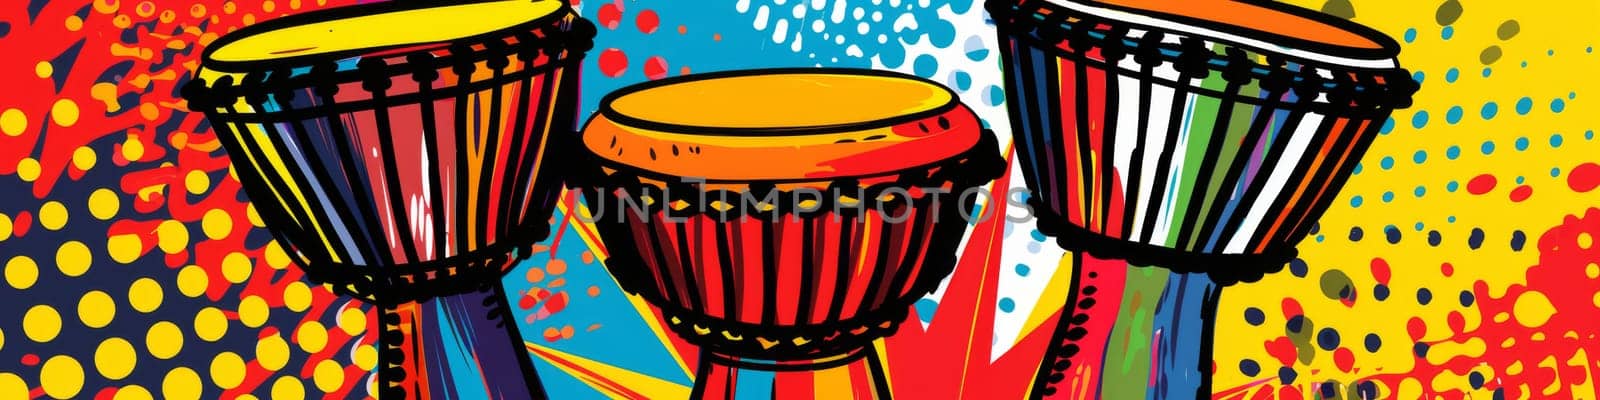 Djembe drums in a row as pop art style, musical instrument by Kadula